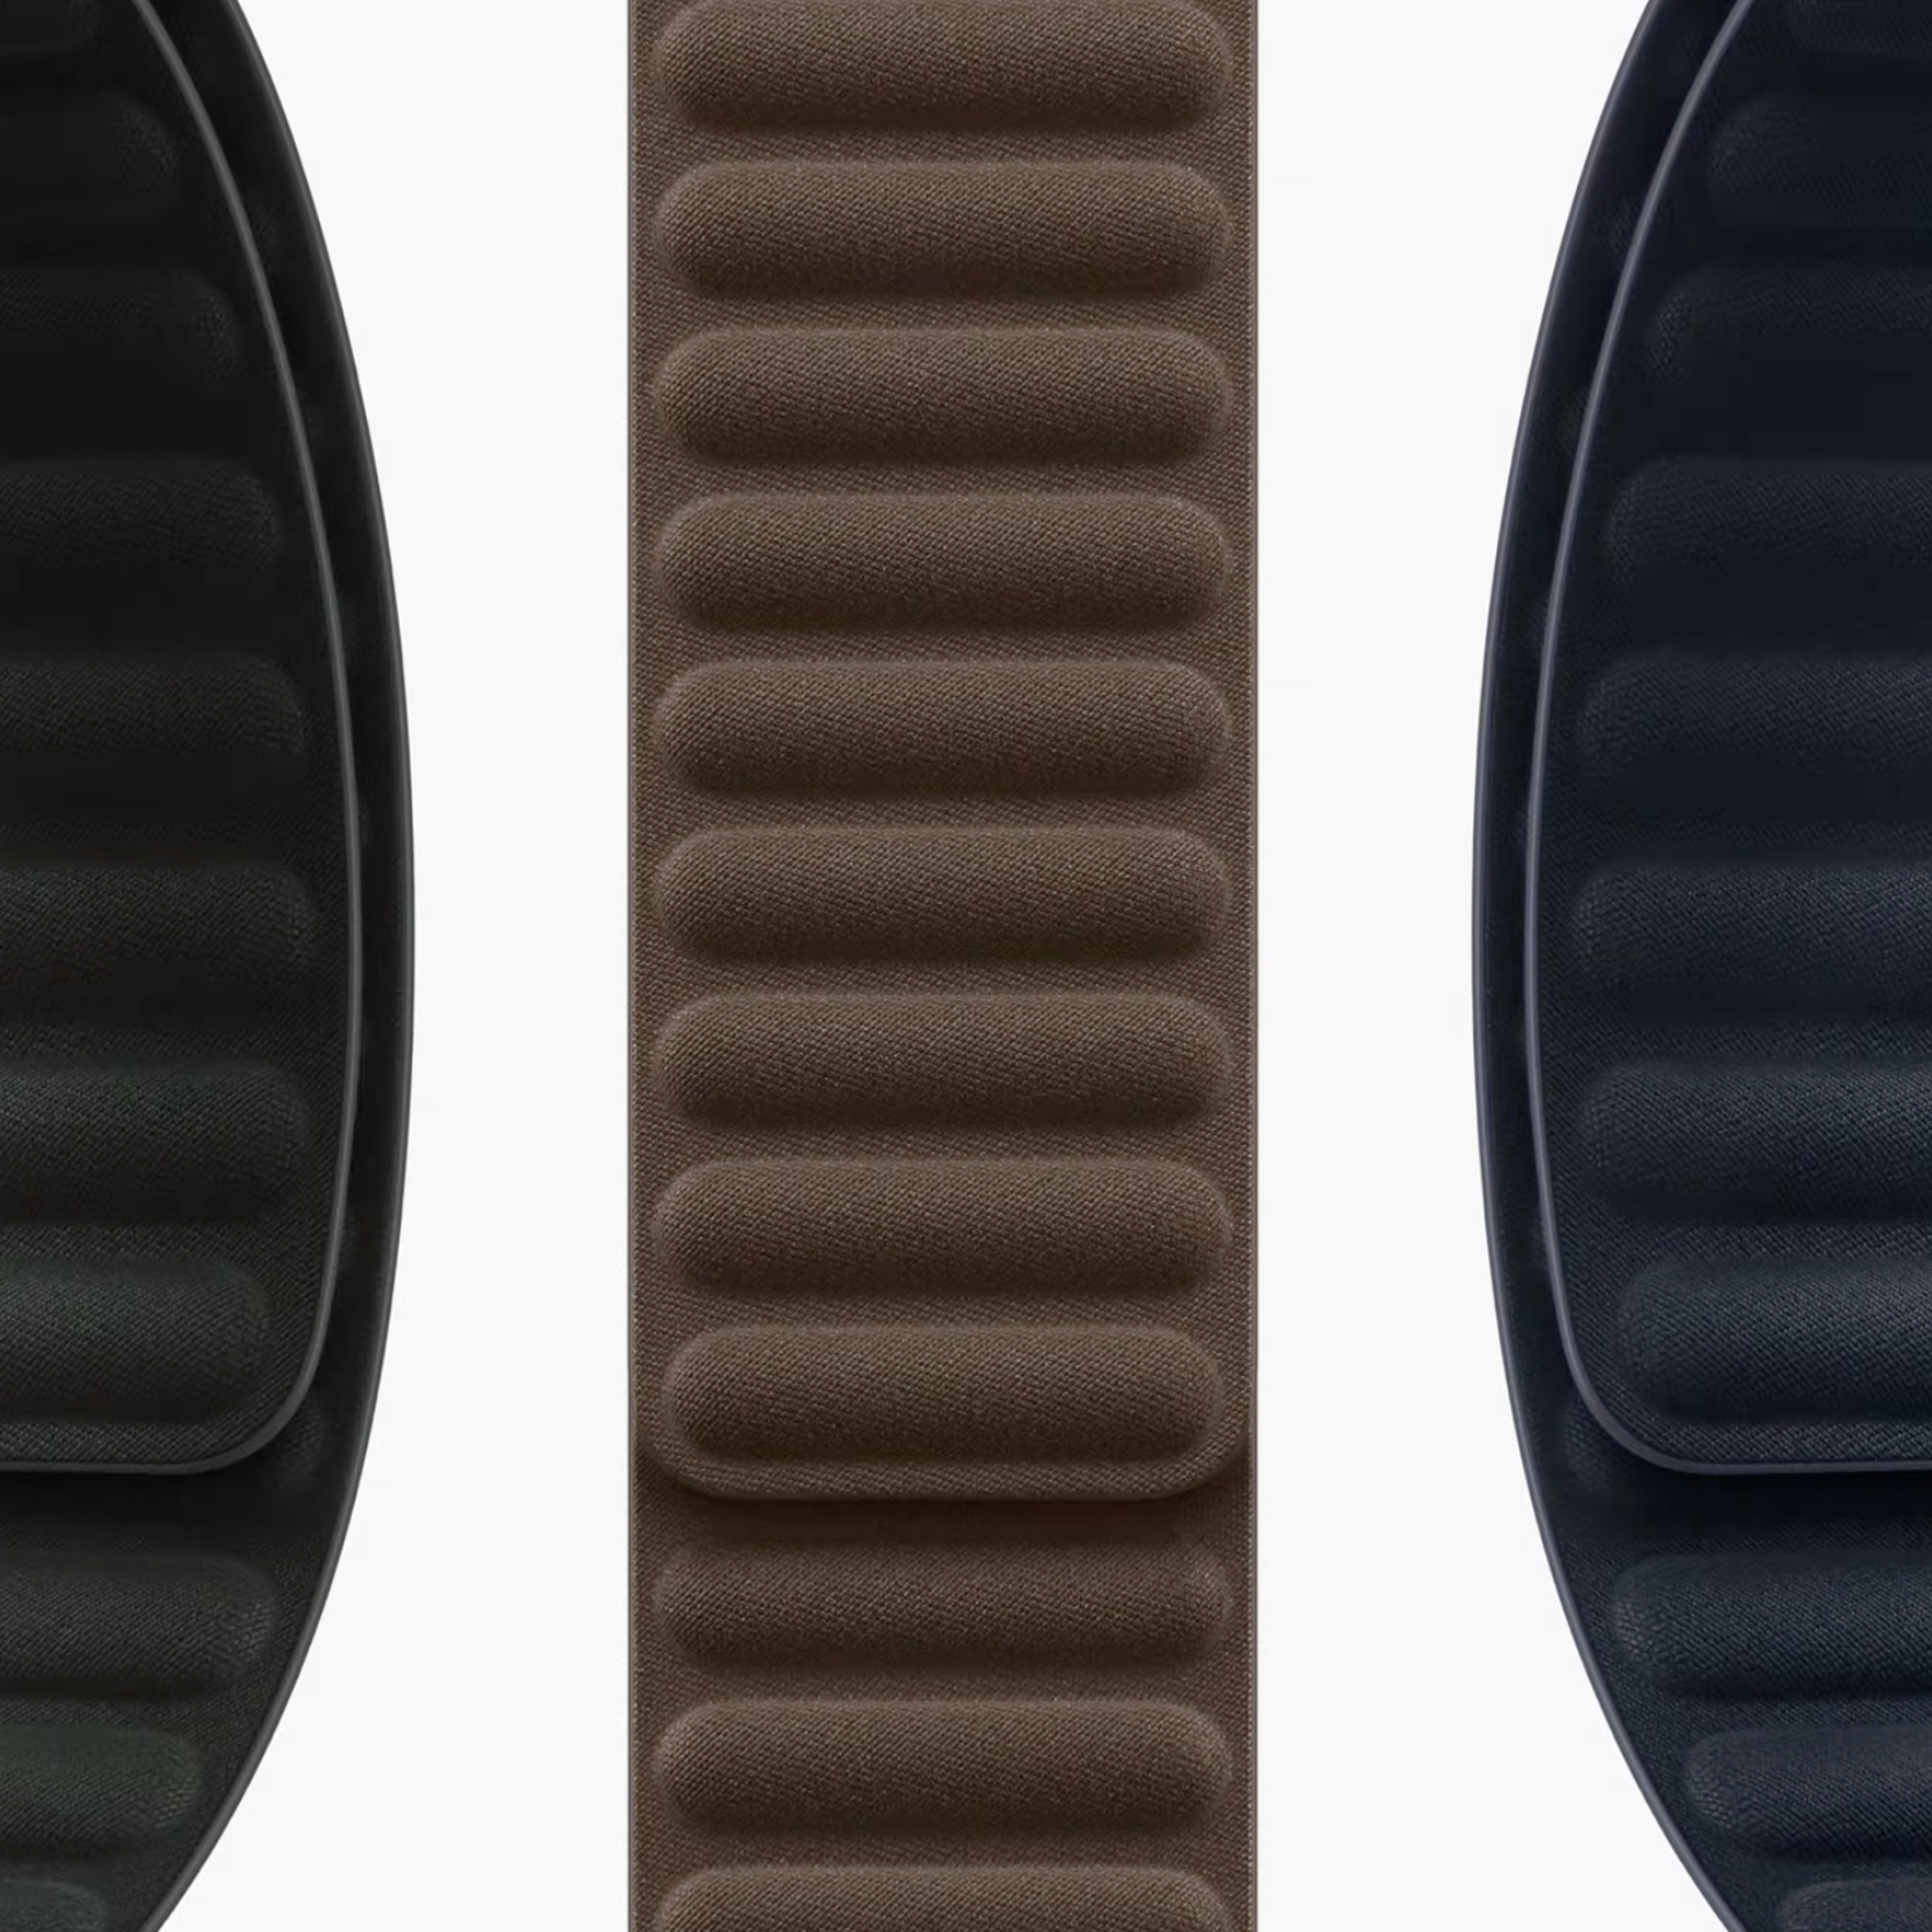 Close-up views of three colors of Apple Watch’s new FineWoven bands, on a white background.